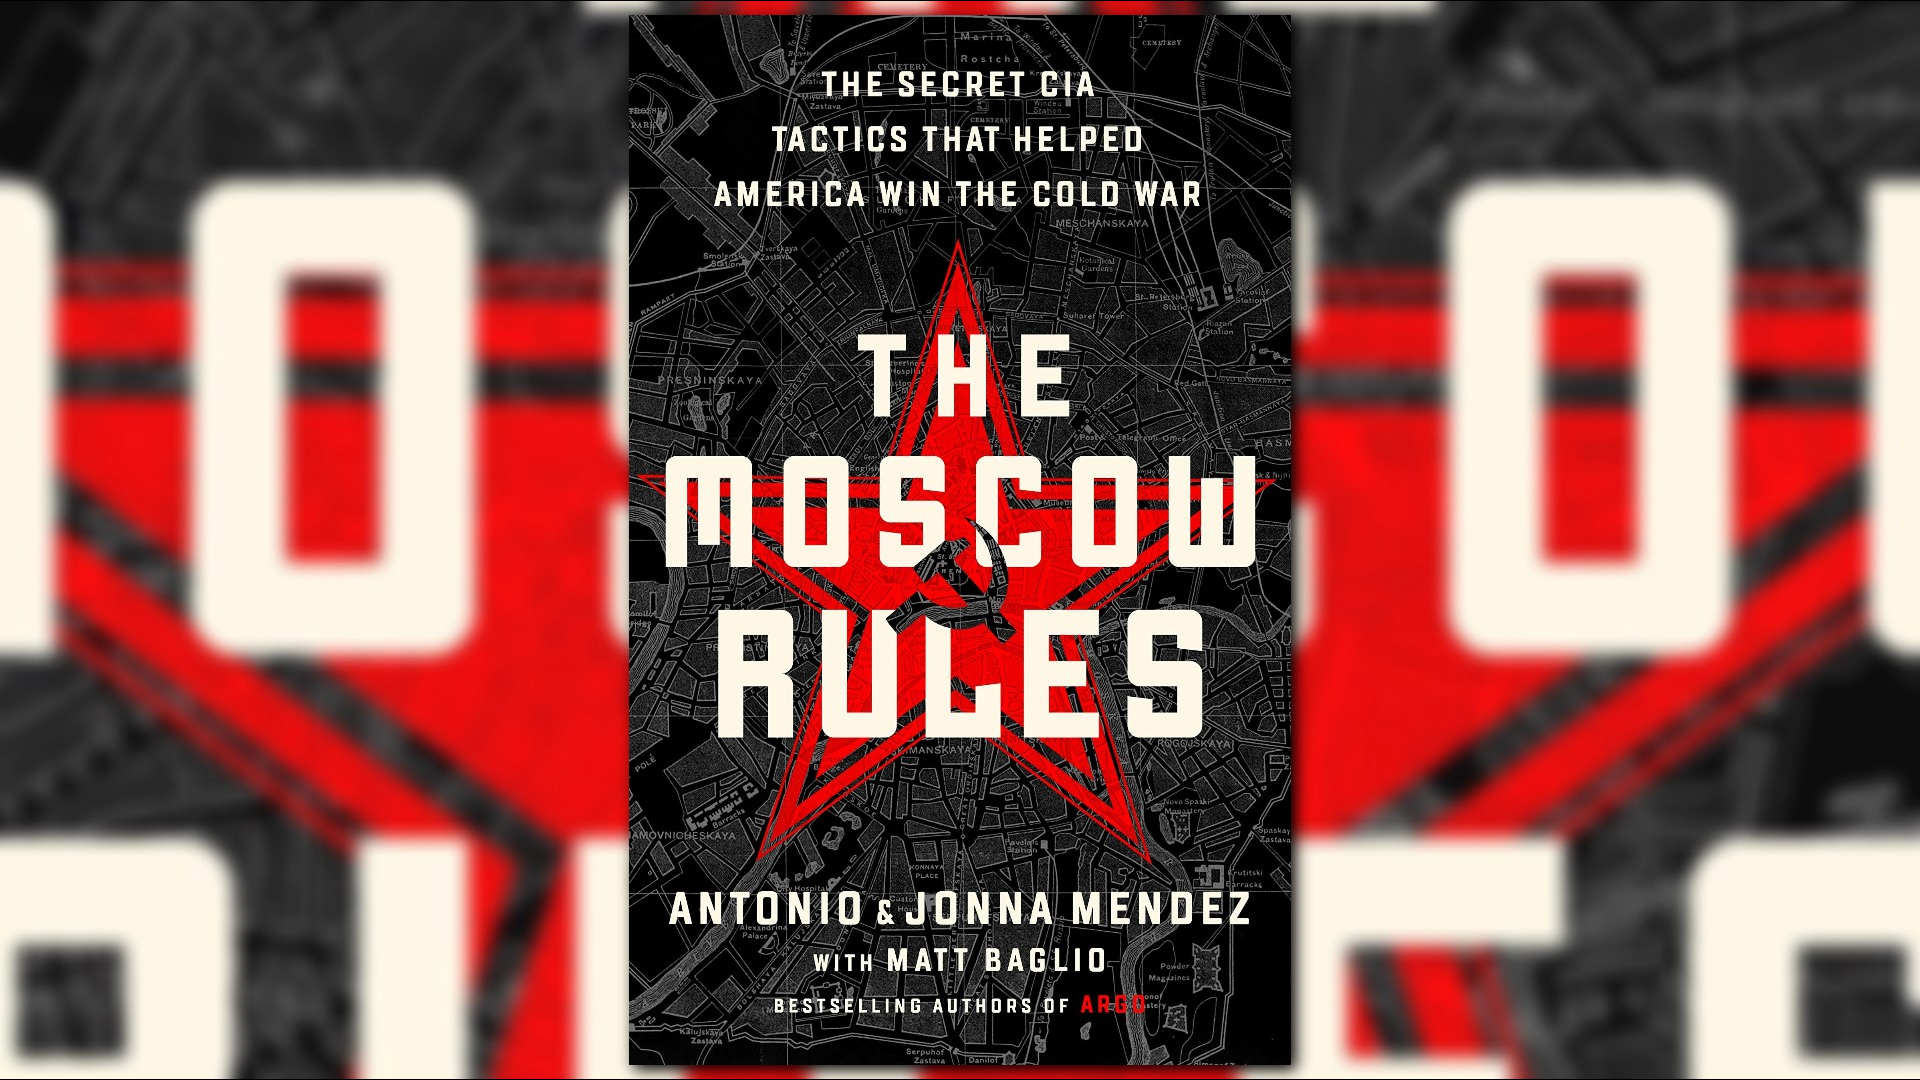 The Moscow Rules tells a true story of how Antonio and Jonna Mendez used stealthy CIA tactics to help America in the Cold War.